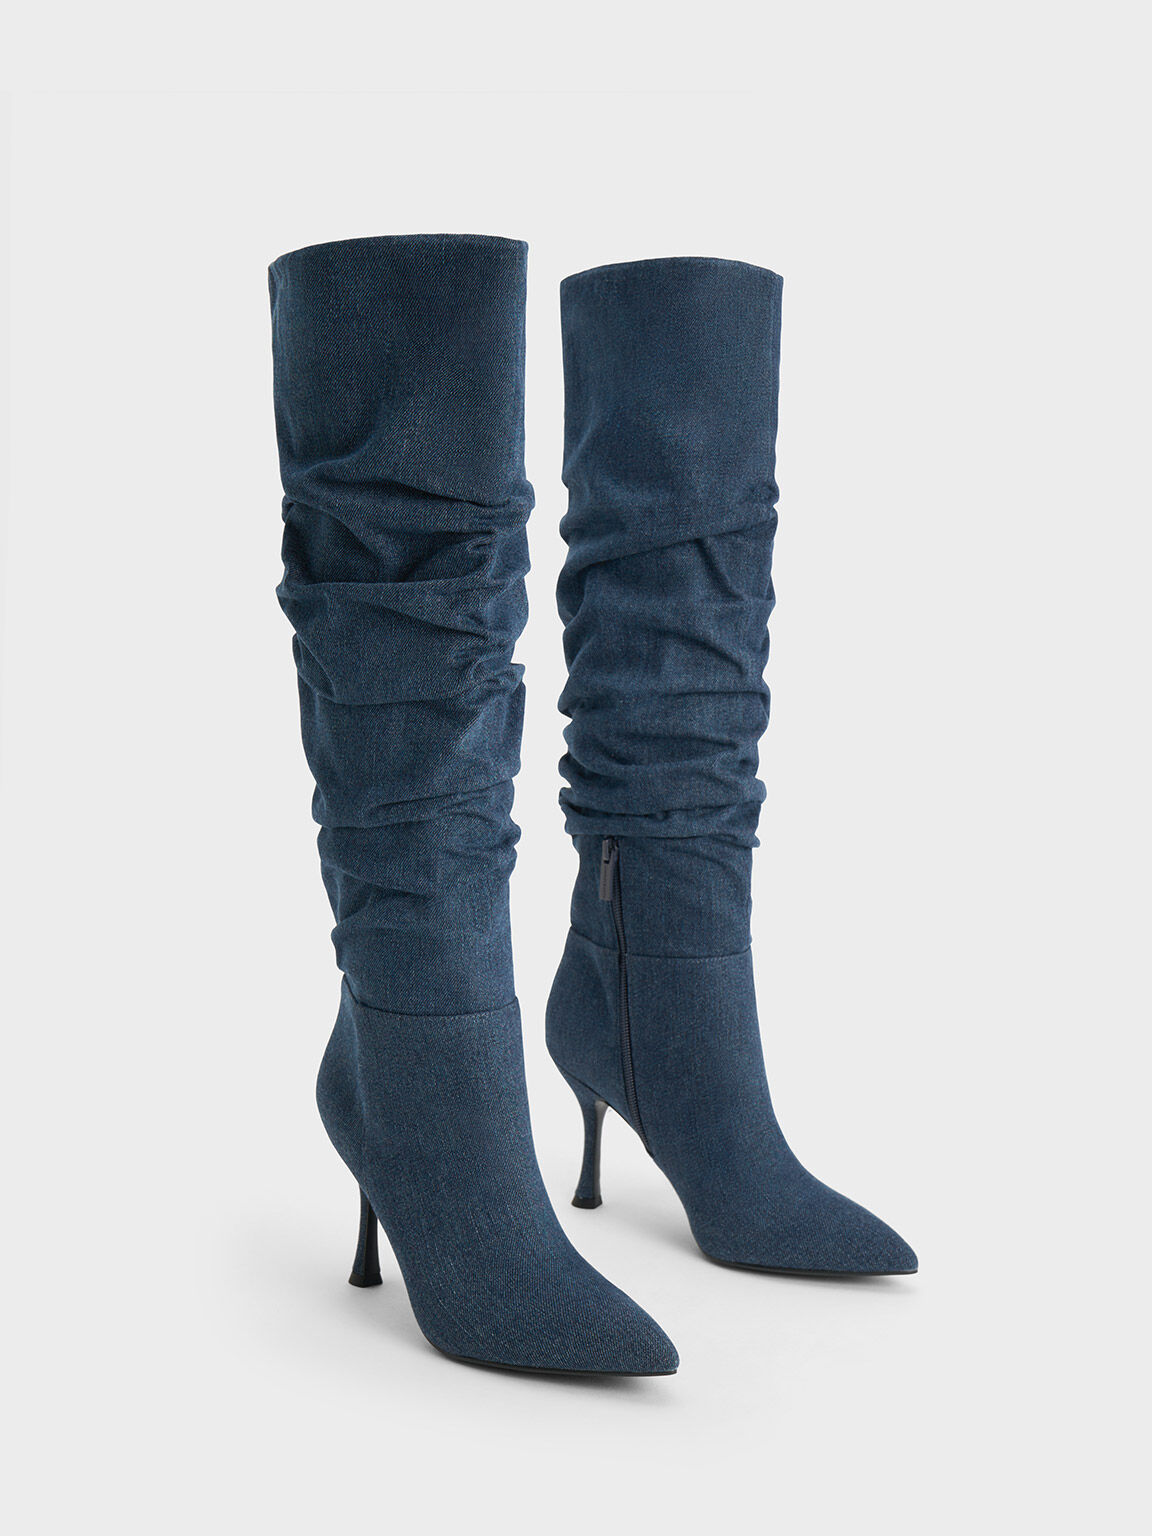 Blue Glitter Chunky Heel Ankle Boots For Women, Autumn/winter | SHEIN USA